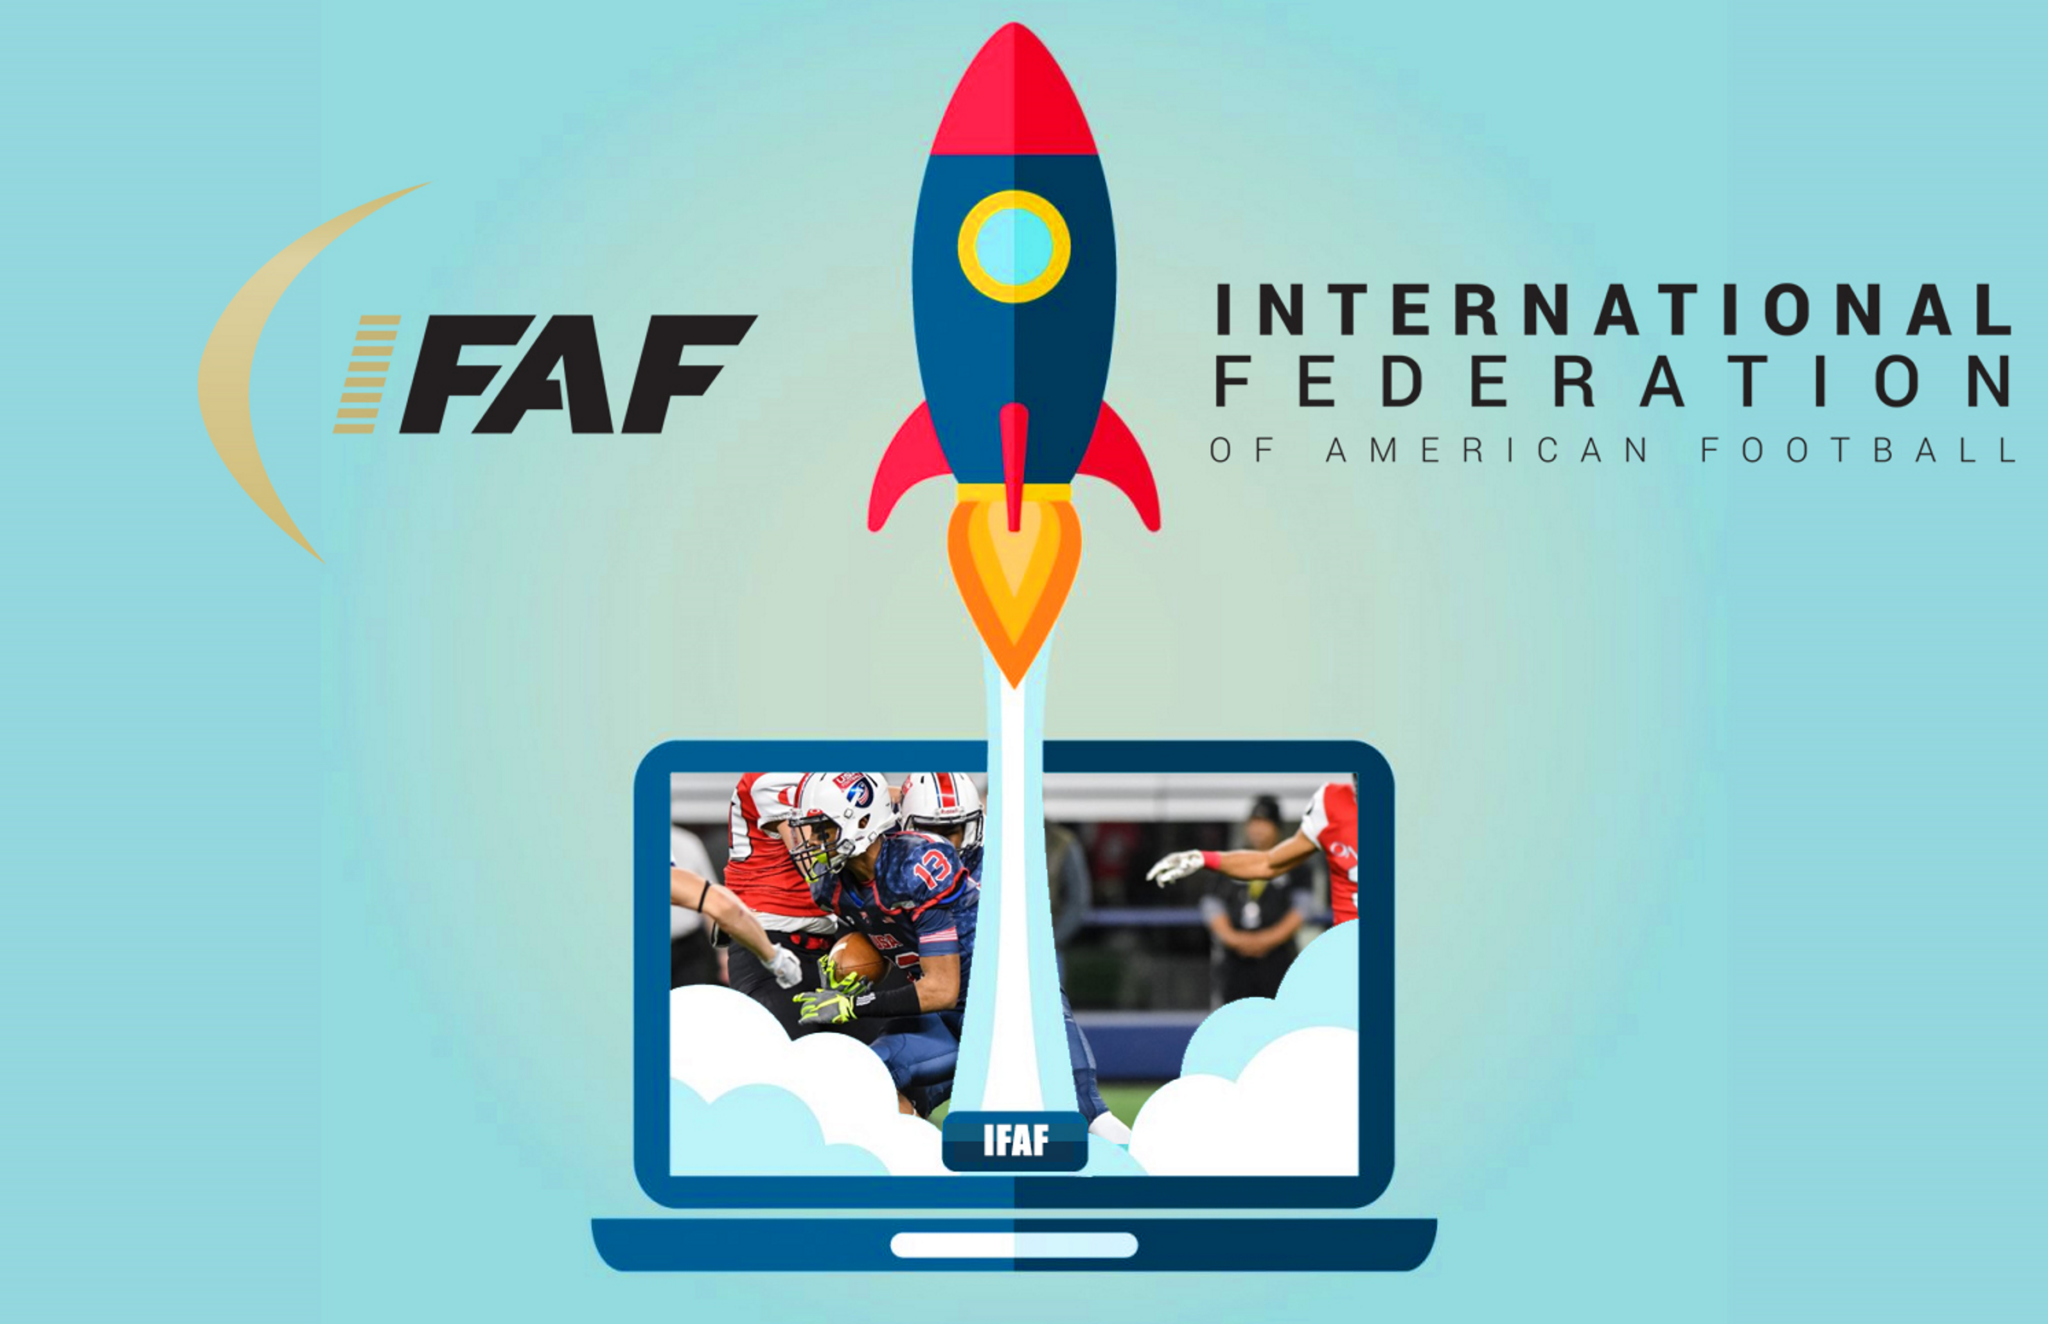 International Federation of American Football announces rebrand and